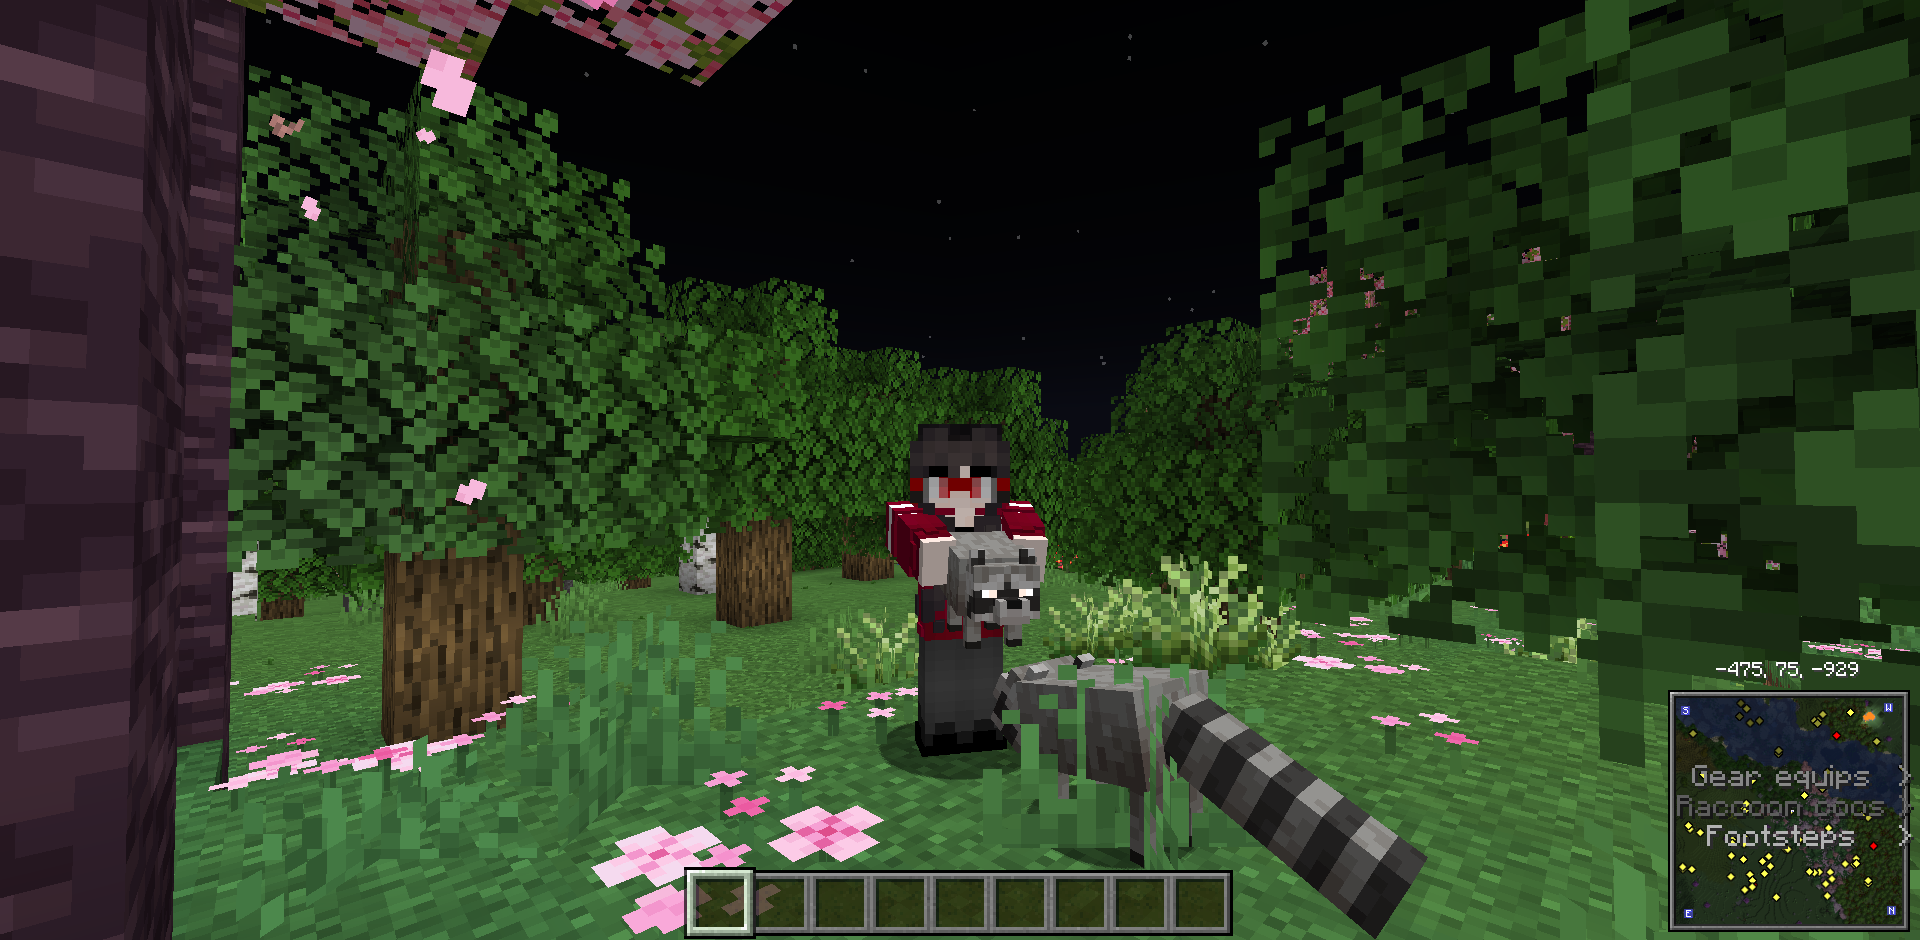 I will develop your Minecraft modpack by Maxime_Merm